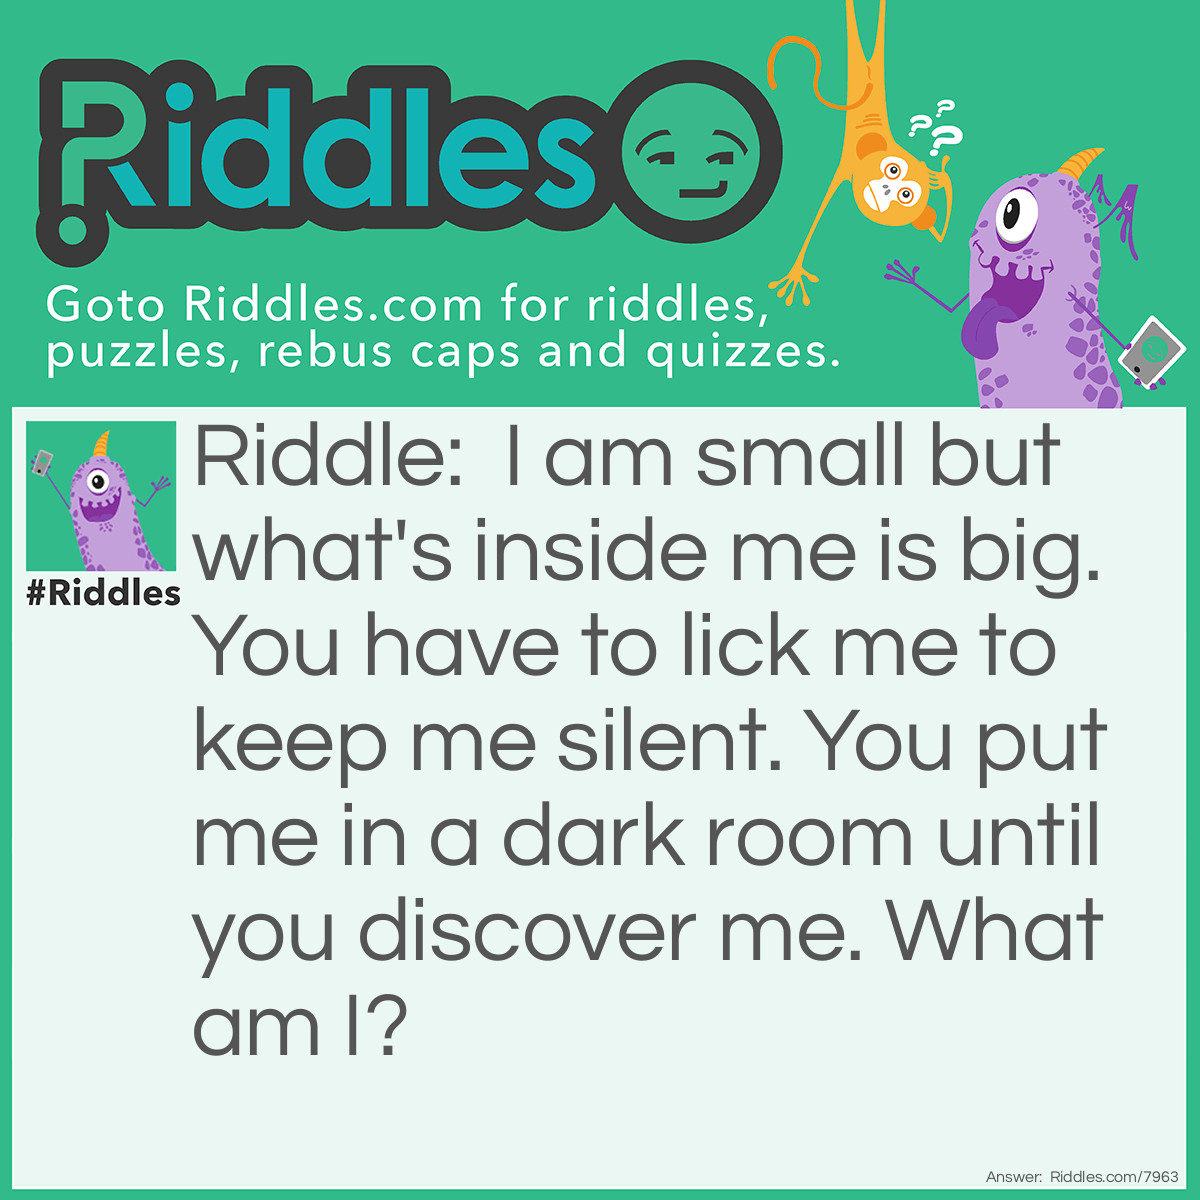 Riddle: I am small but what's inside me is big. You have to lick me to keep me silent. You put me in a dark room until you discover me. What am I? Answer: An Envelope!